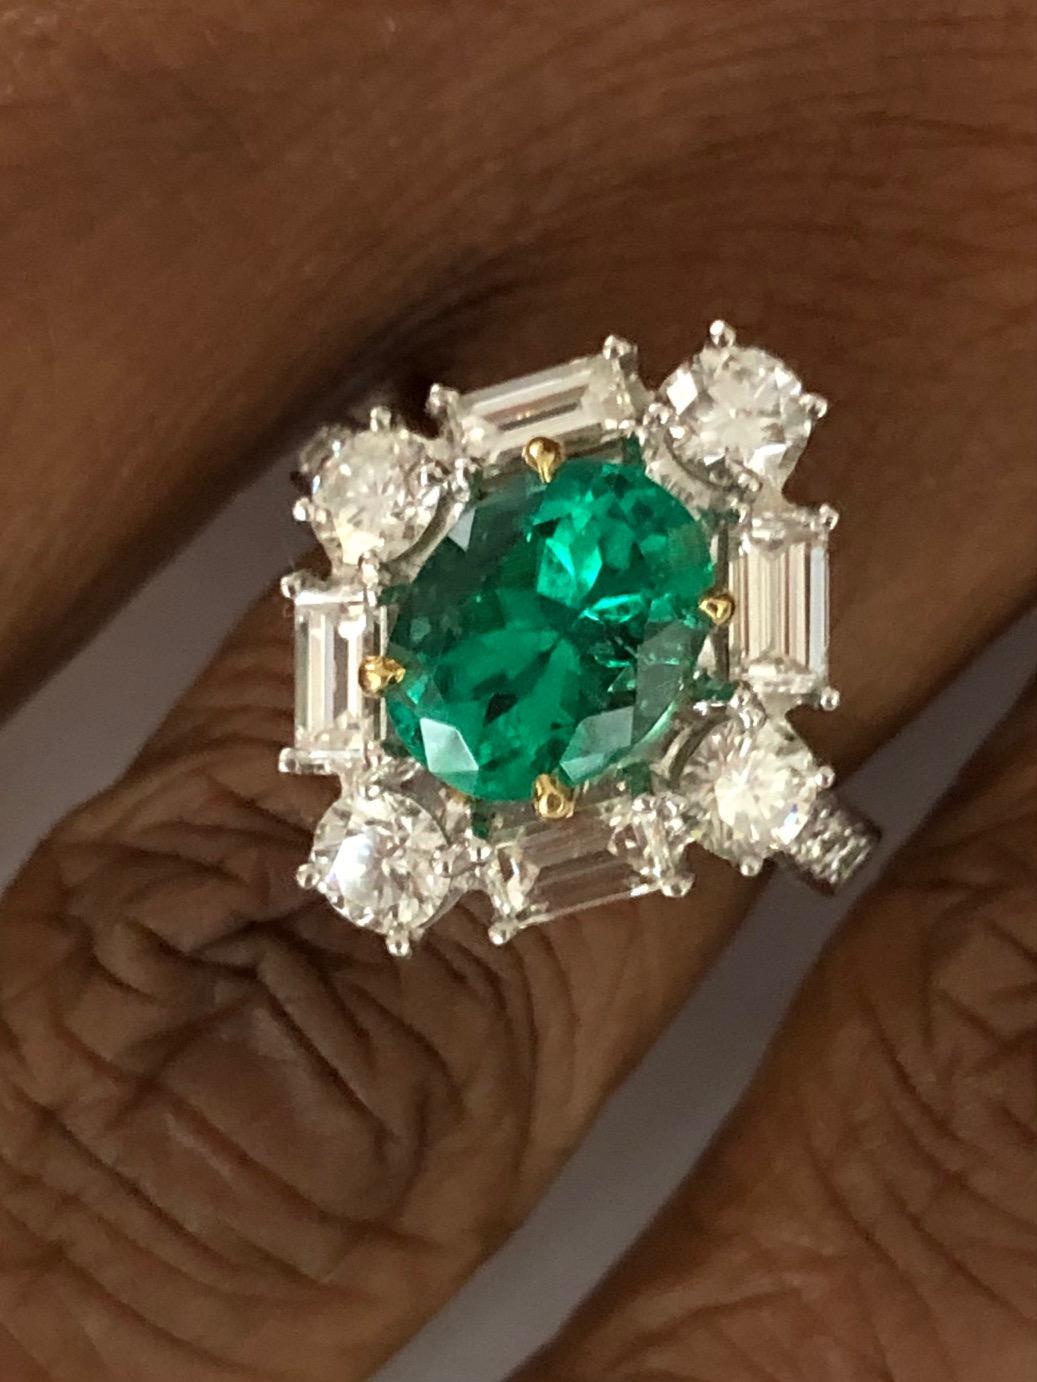 An out of the ordinary design, made in Platinum with 18K Yellow Hold for the prongs to hold this beautiful Colombian Emerald of 2.42 carats and 16 fine quality Diamonds 2.42 carats.

We design and manufacture our jewelry in our workshop, located in